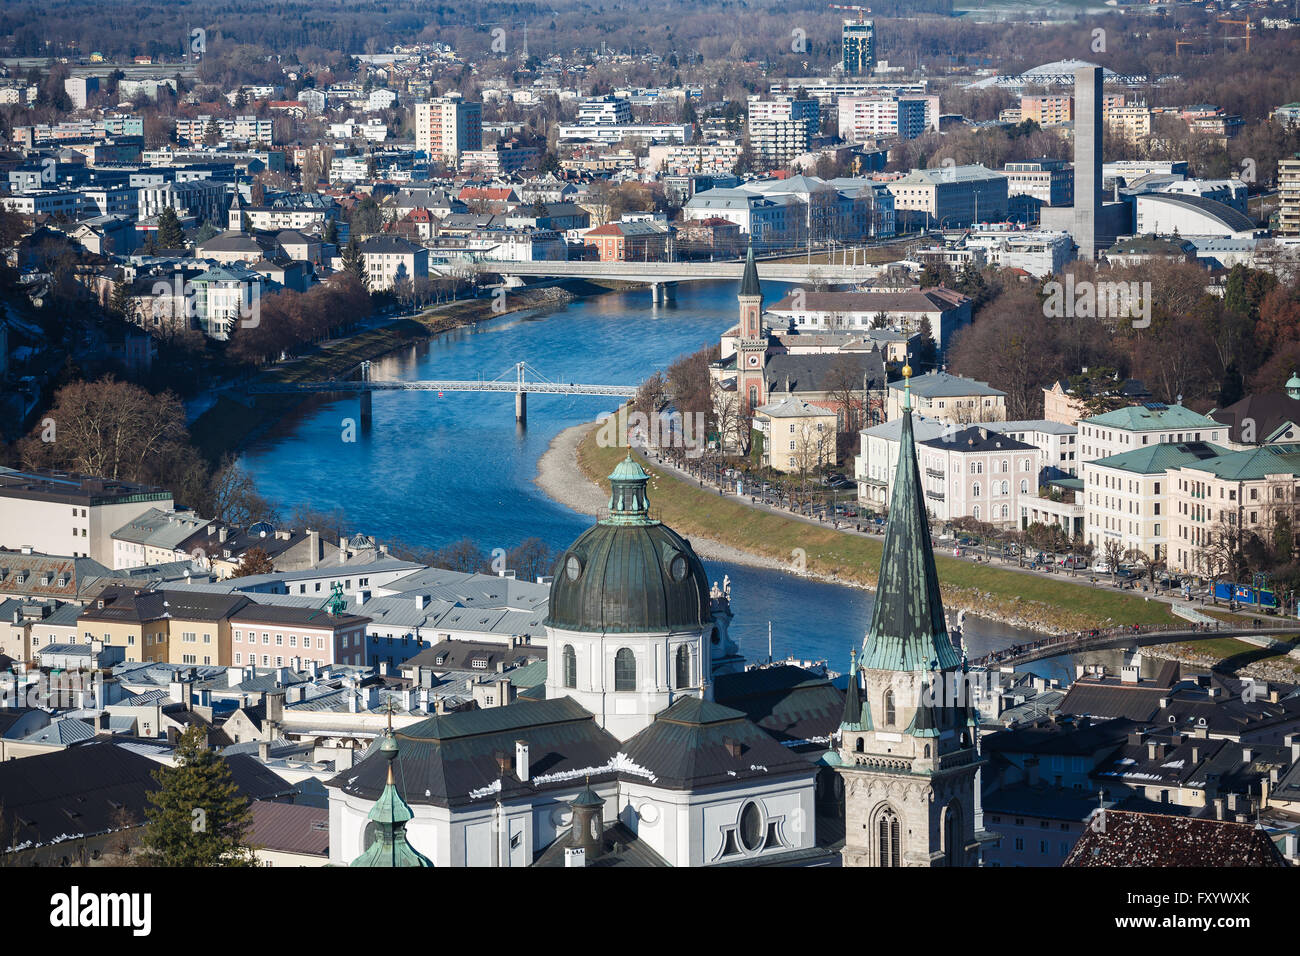 View of the cityscape of Salzburg from top of Hohensalzburg Castle, Austria Stock Photo